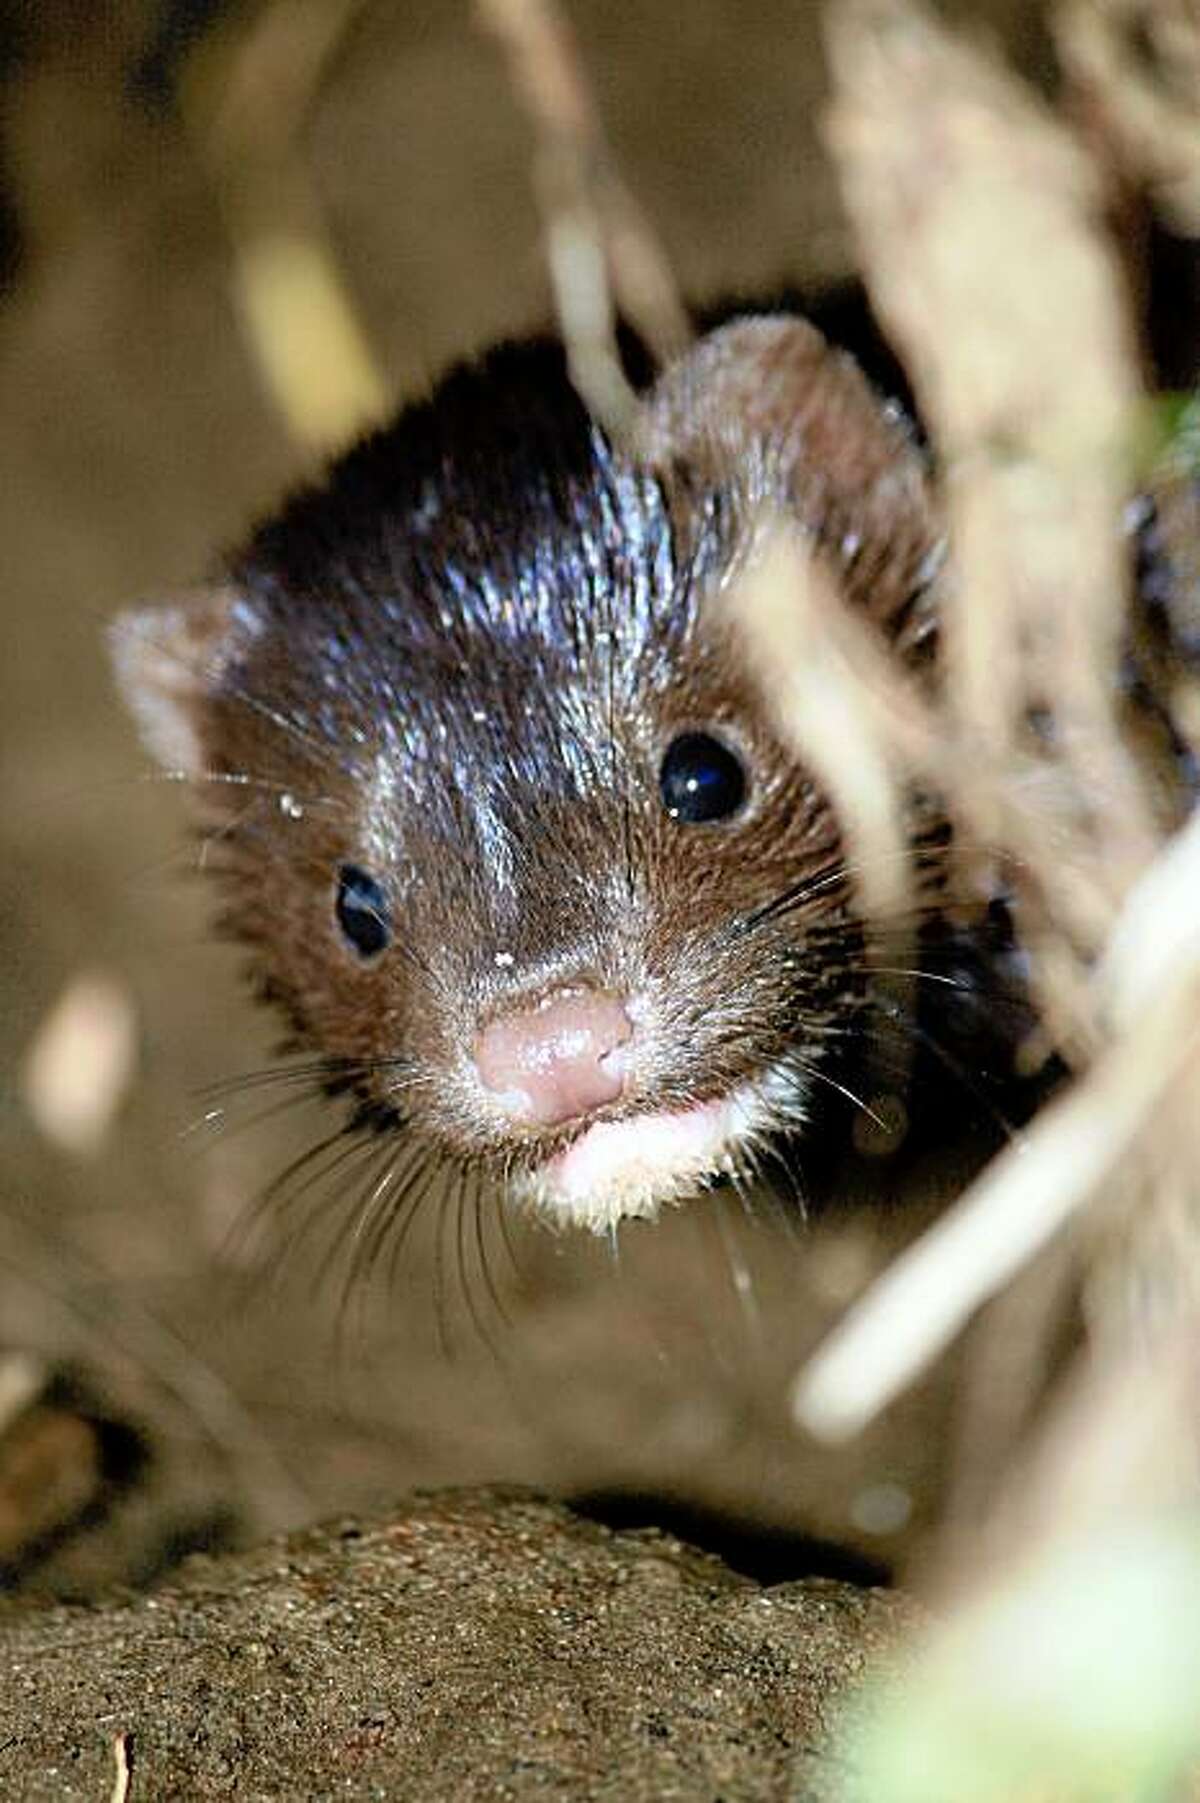 A baby mink hides in a muskrat hole on July 28, 2009 in Martinez, Calif. A family of minks has joined the famed beavers of Alhambra Creek in downtown Martinez. There's a mother mink and four babies.